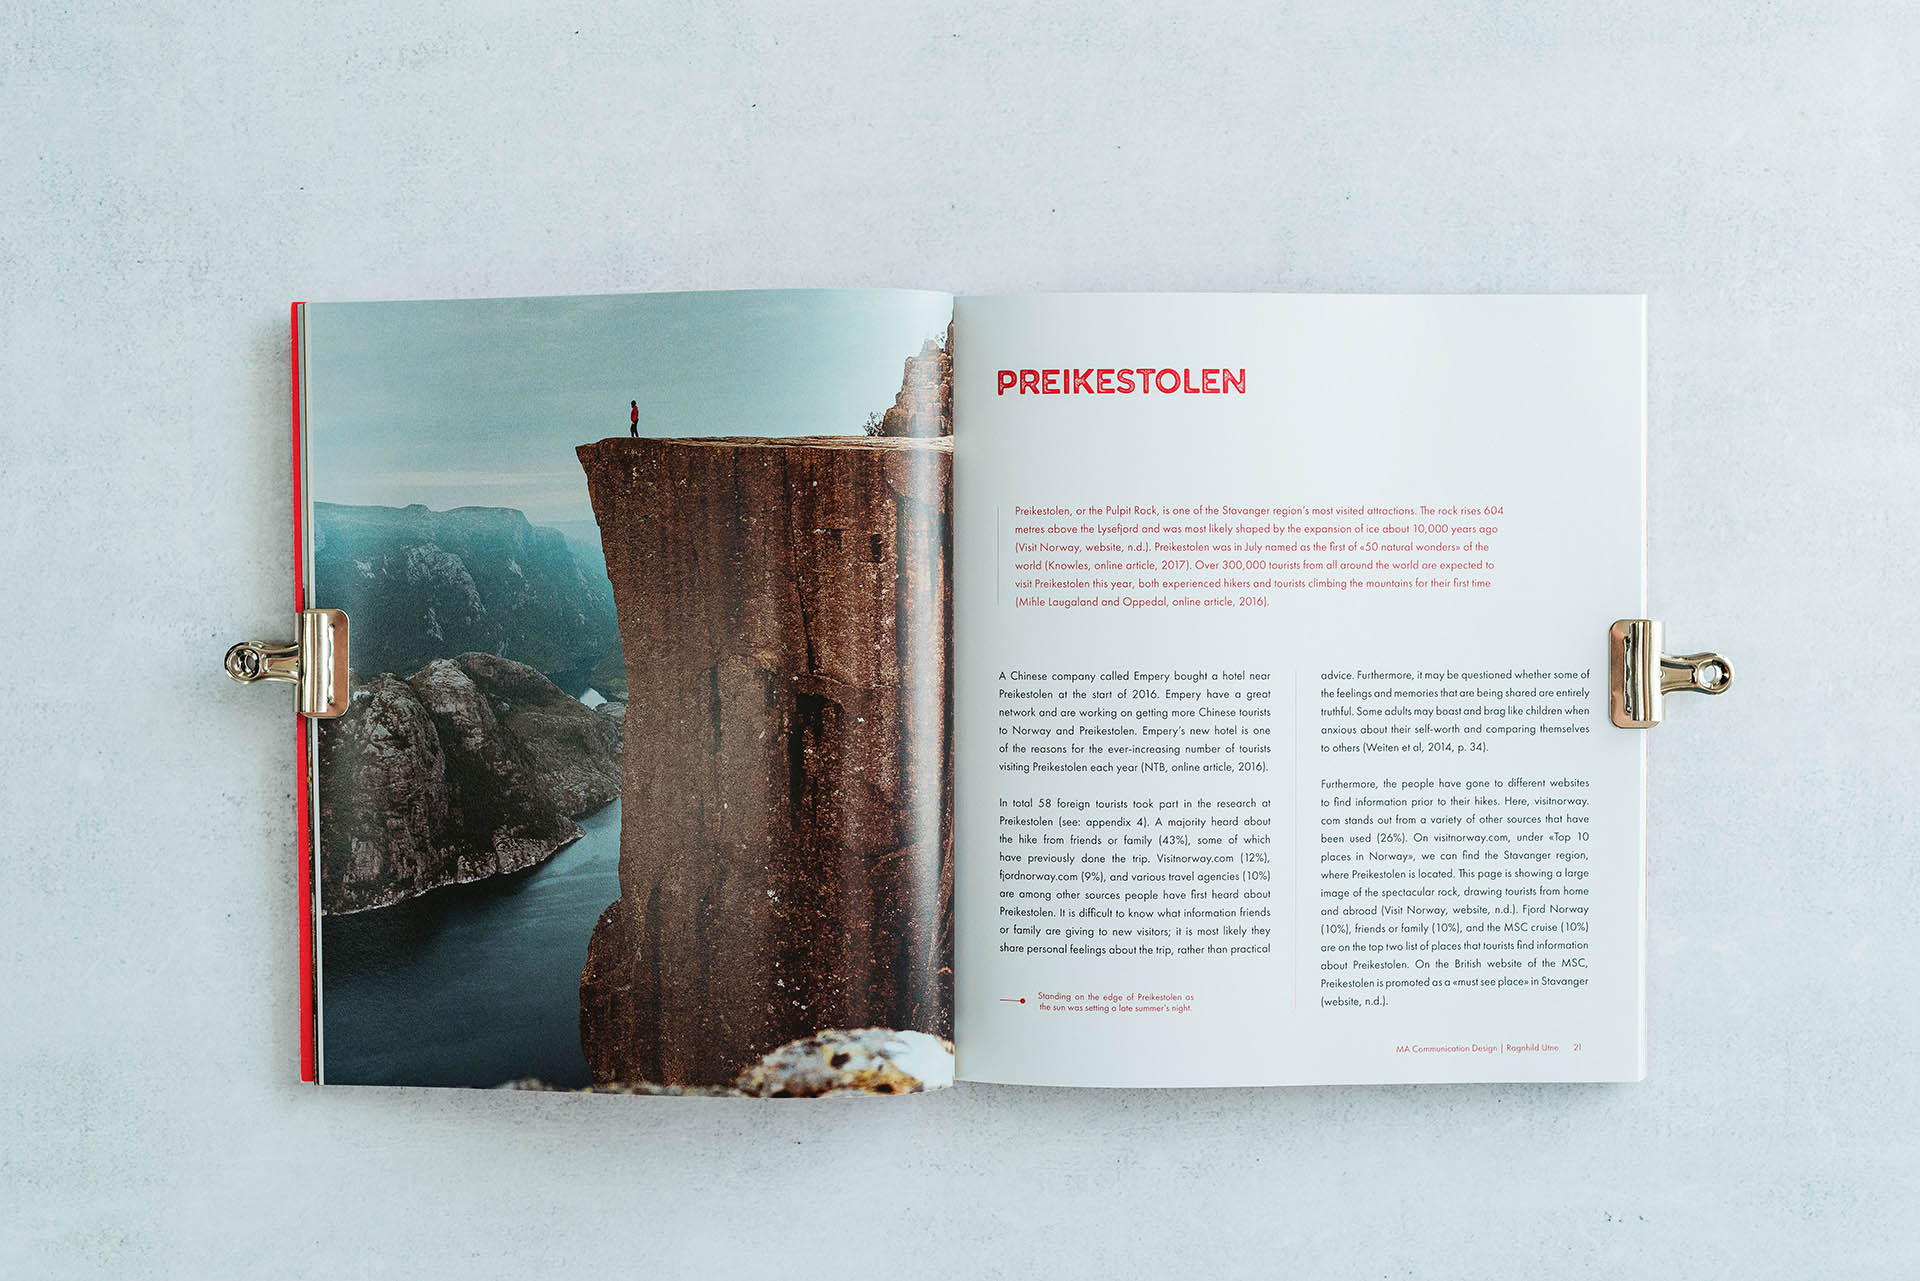 Chapter design on Preikestolen one of the most visited mountain destinations in Norway